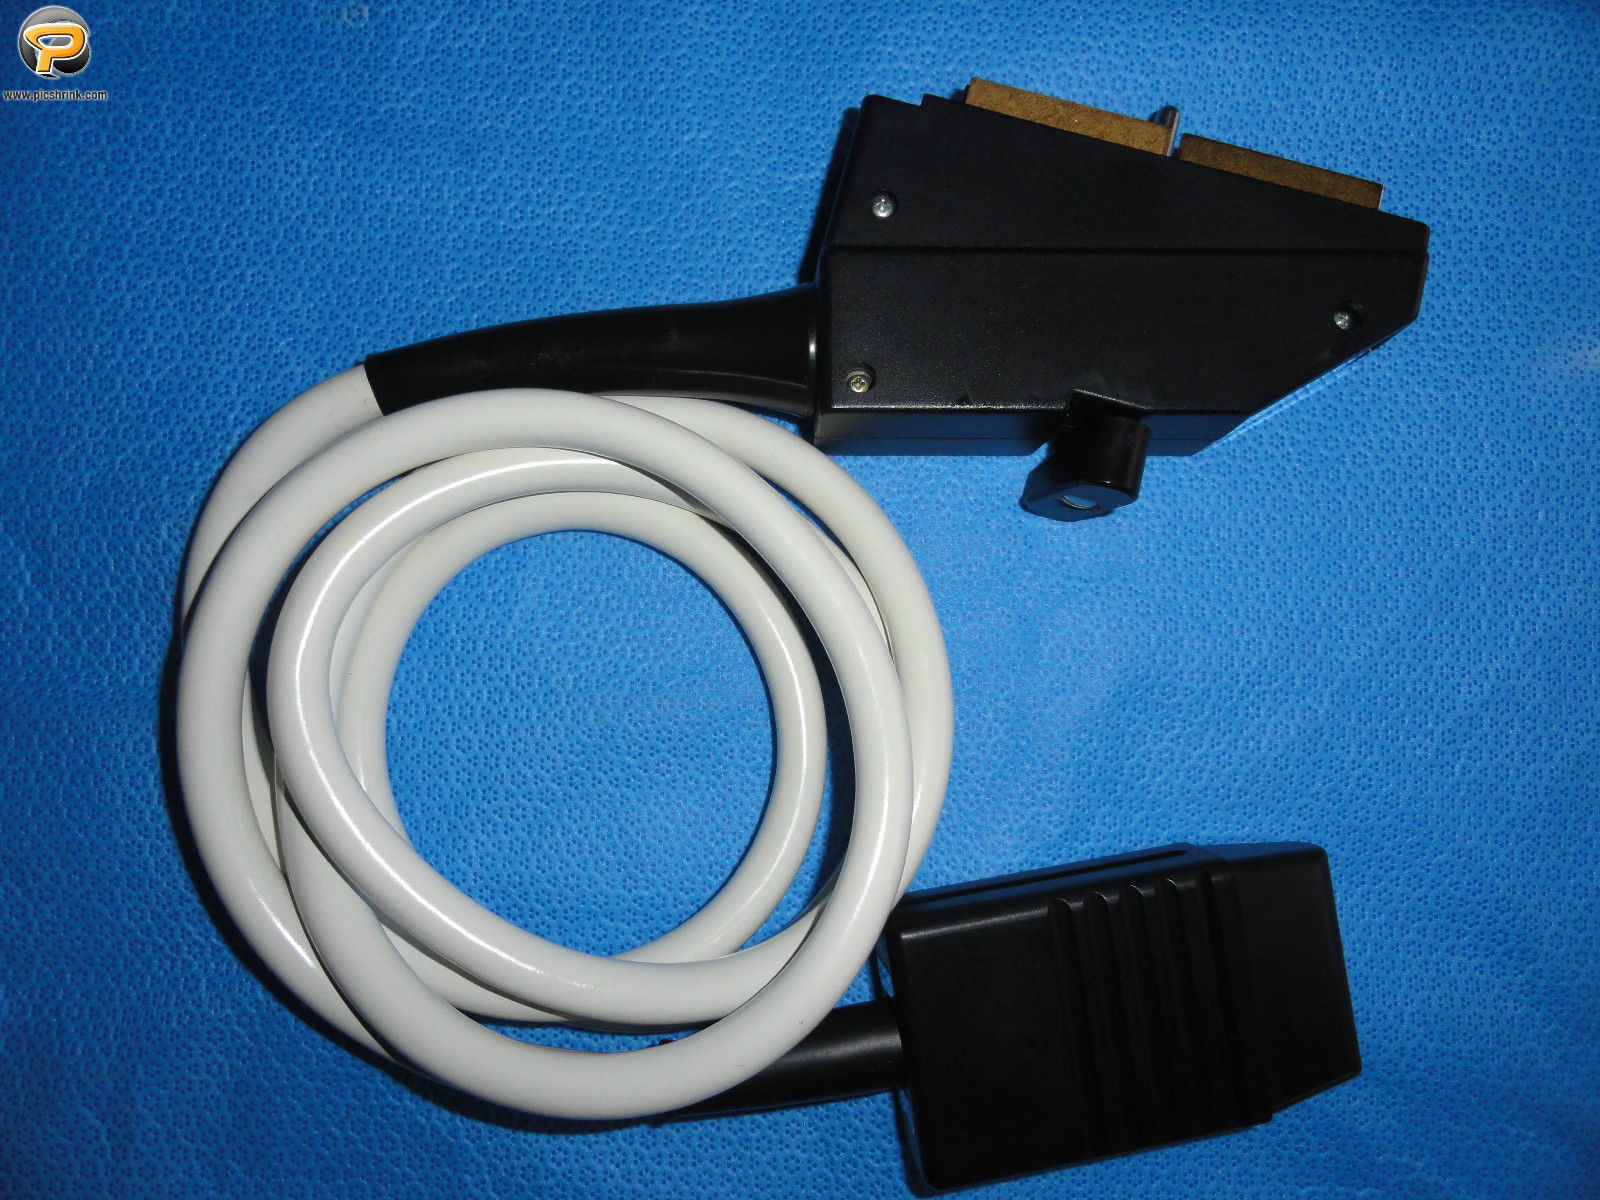 Siemens Acuson L538 Linear Array Ultrasound Transducer for 128XP-10 (3481-82) DIAGNOSTIC ULTRASOUND MACHINES FOR SALE